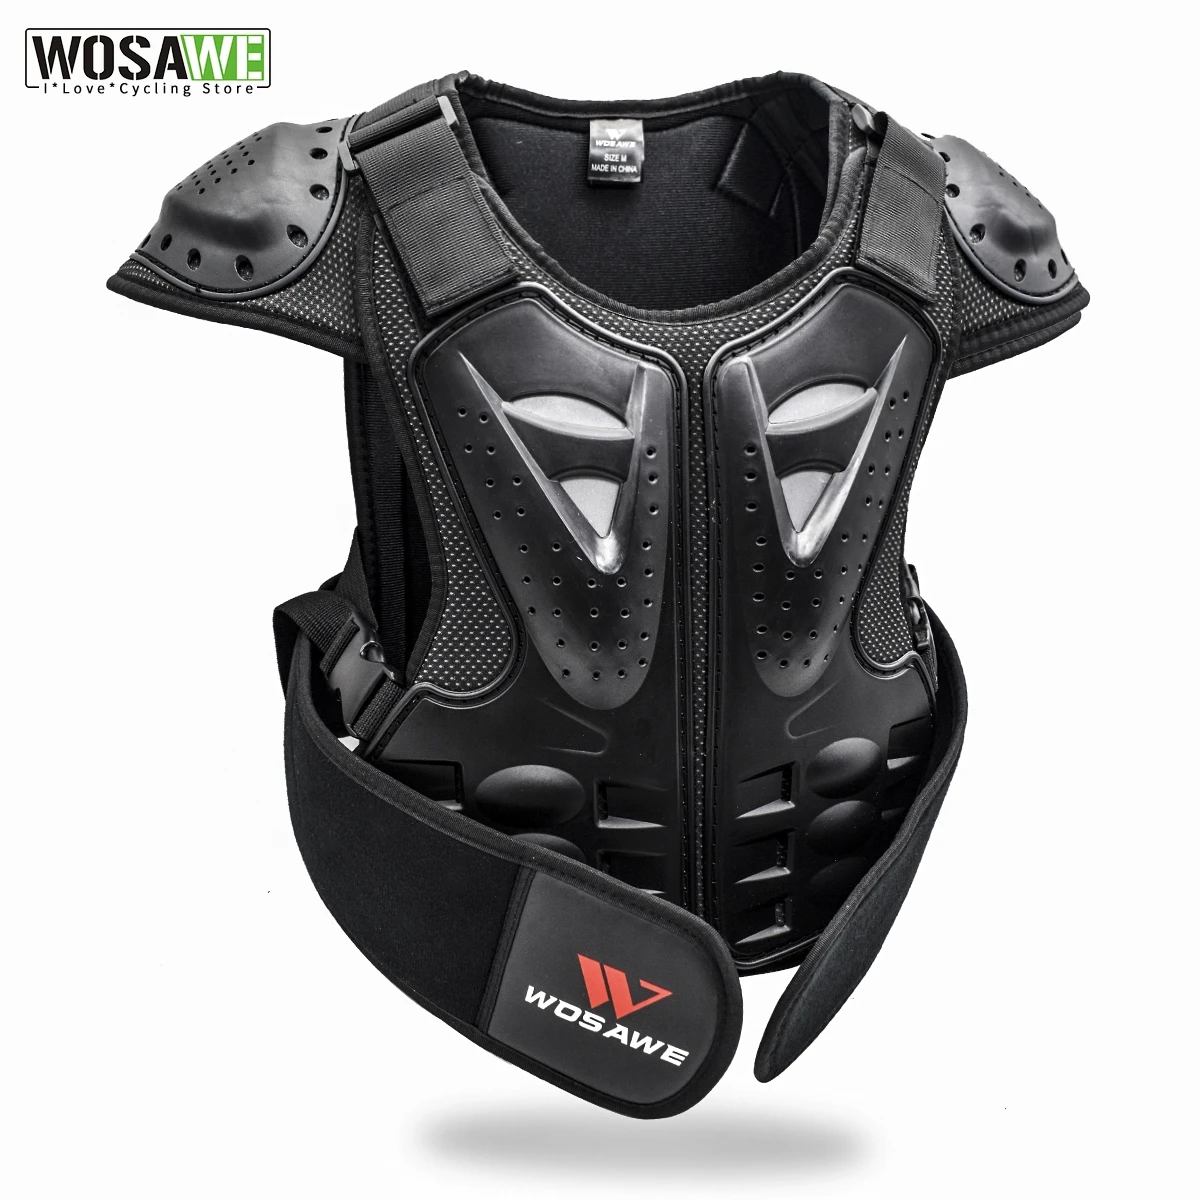 

WOSAWE Protection Ski Jackets for 4-16 Child Kids Back Guard Bike Armor Gear Motorcycle Bicycle Snowboard Roller Hockey Clothes